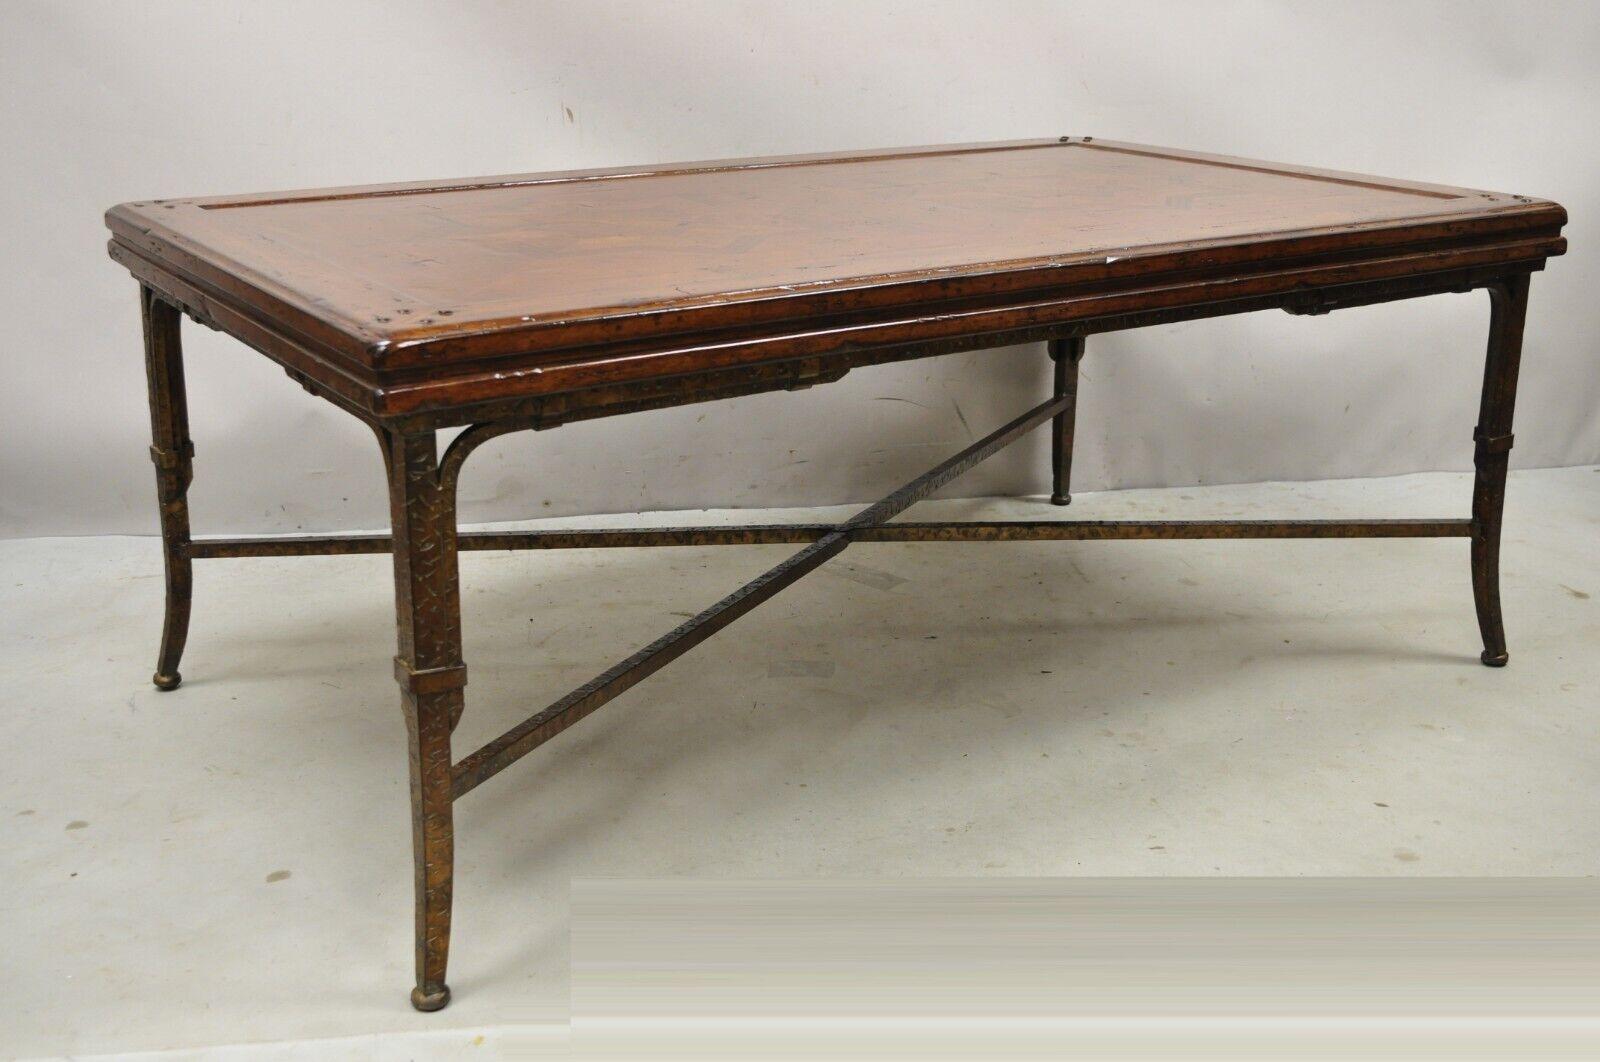 Italian Mediterranean Style Marquetry Star Inlay Iron Base Maitland Smith Style Coffee Table. Item features heavy forged iron stretcher base, solid wood marquetry inlay star form top, distressed finish, very nice item, quality craftsmanship, great